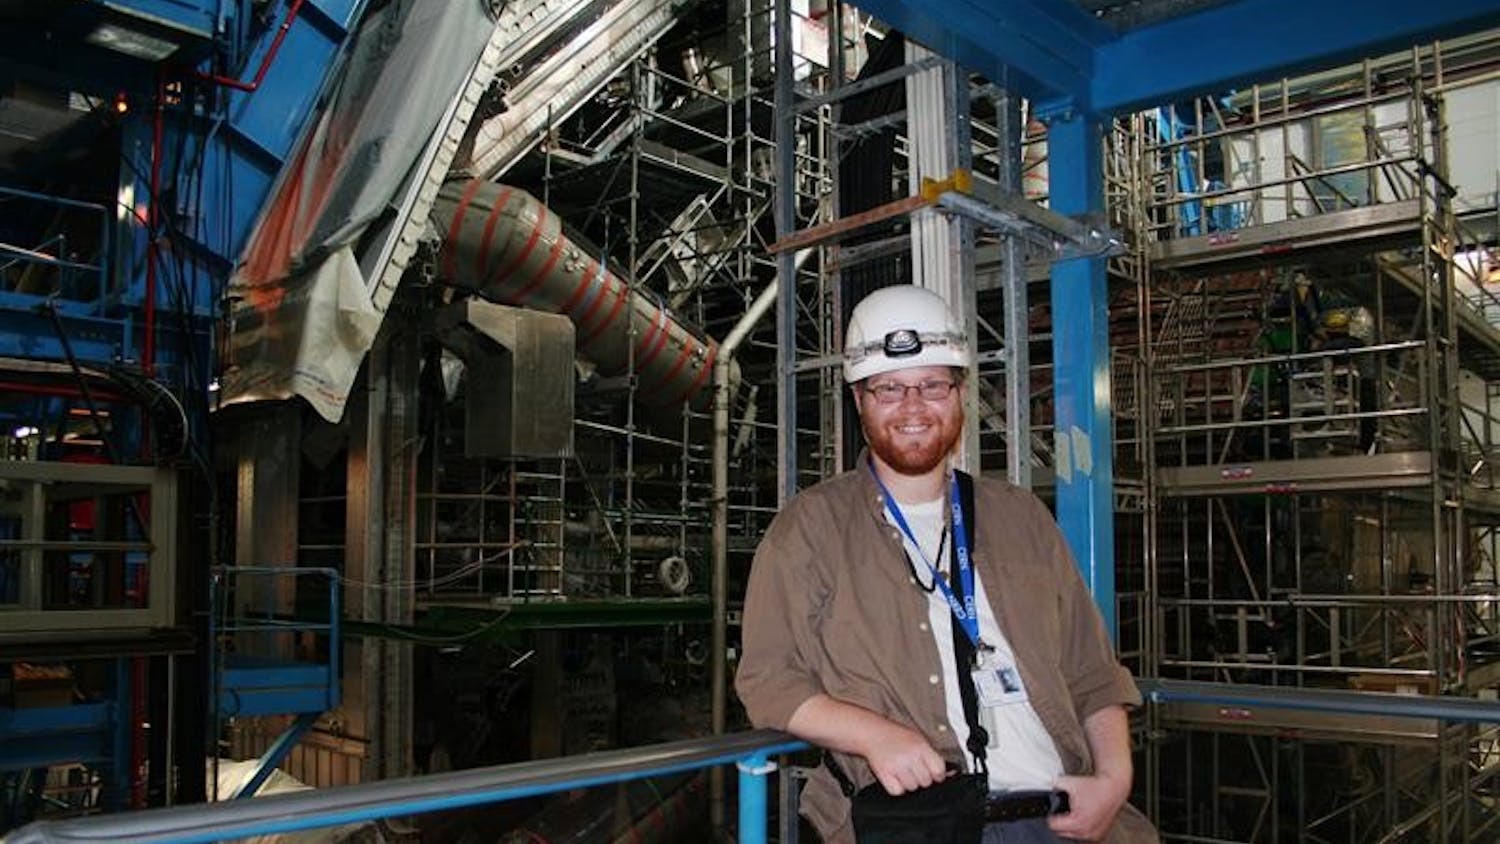 Denver Whittington – grad student working on the CERN project